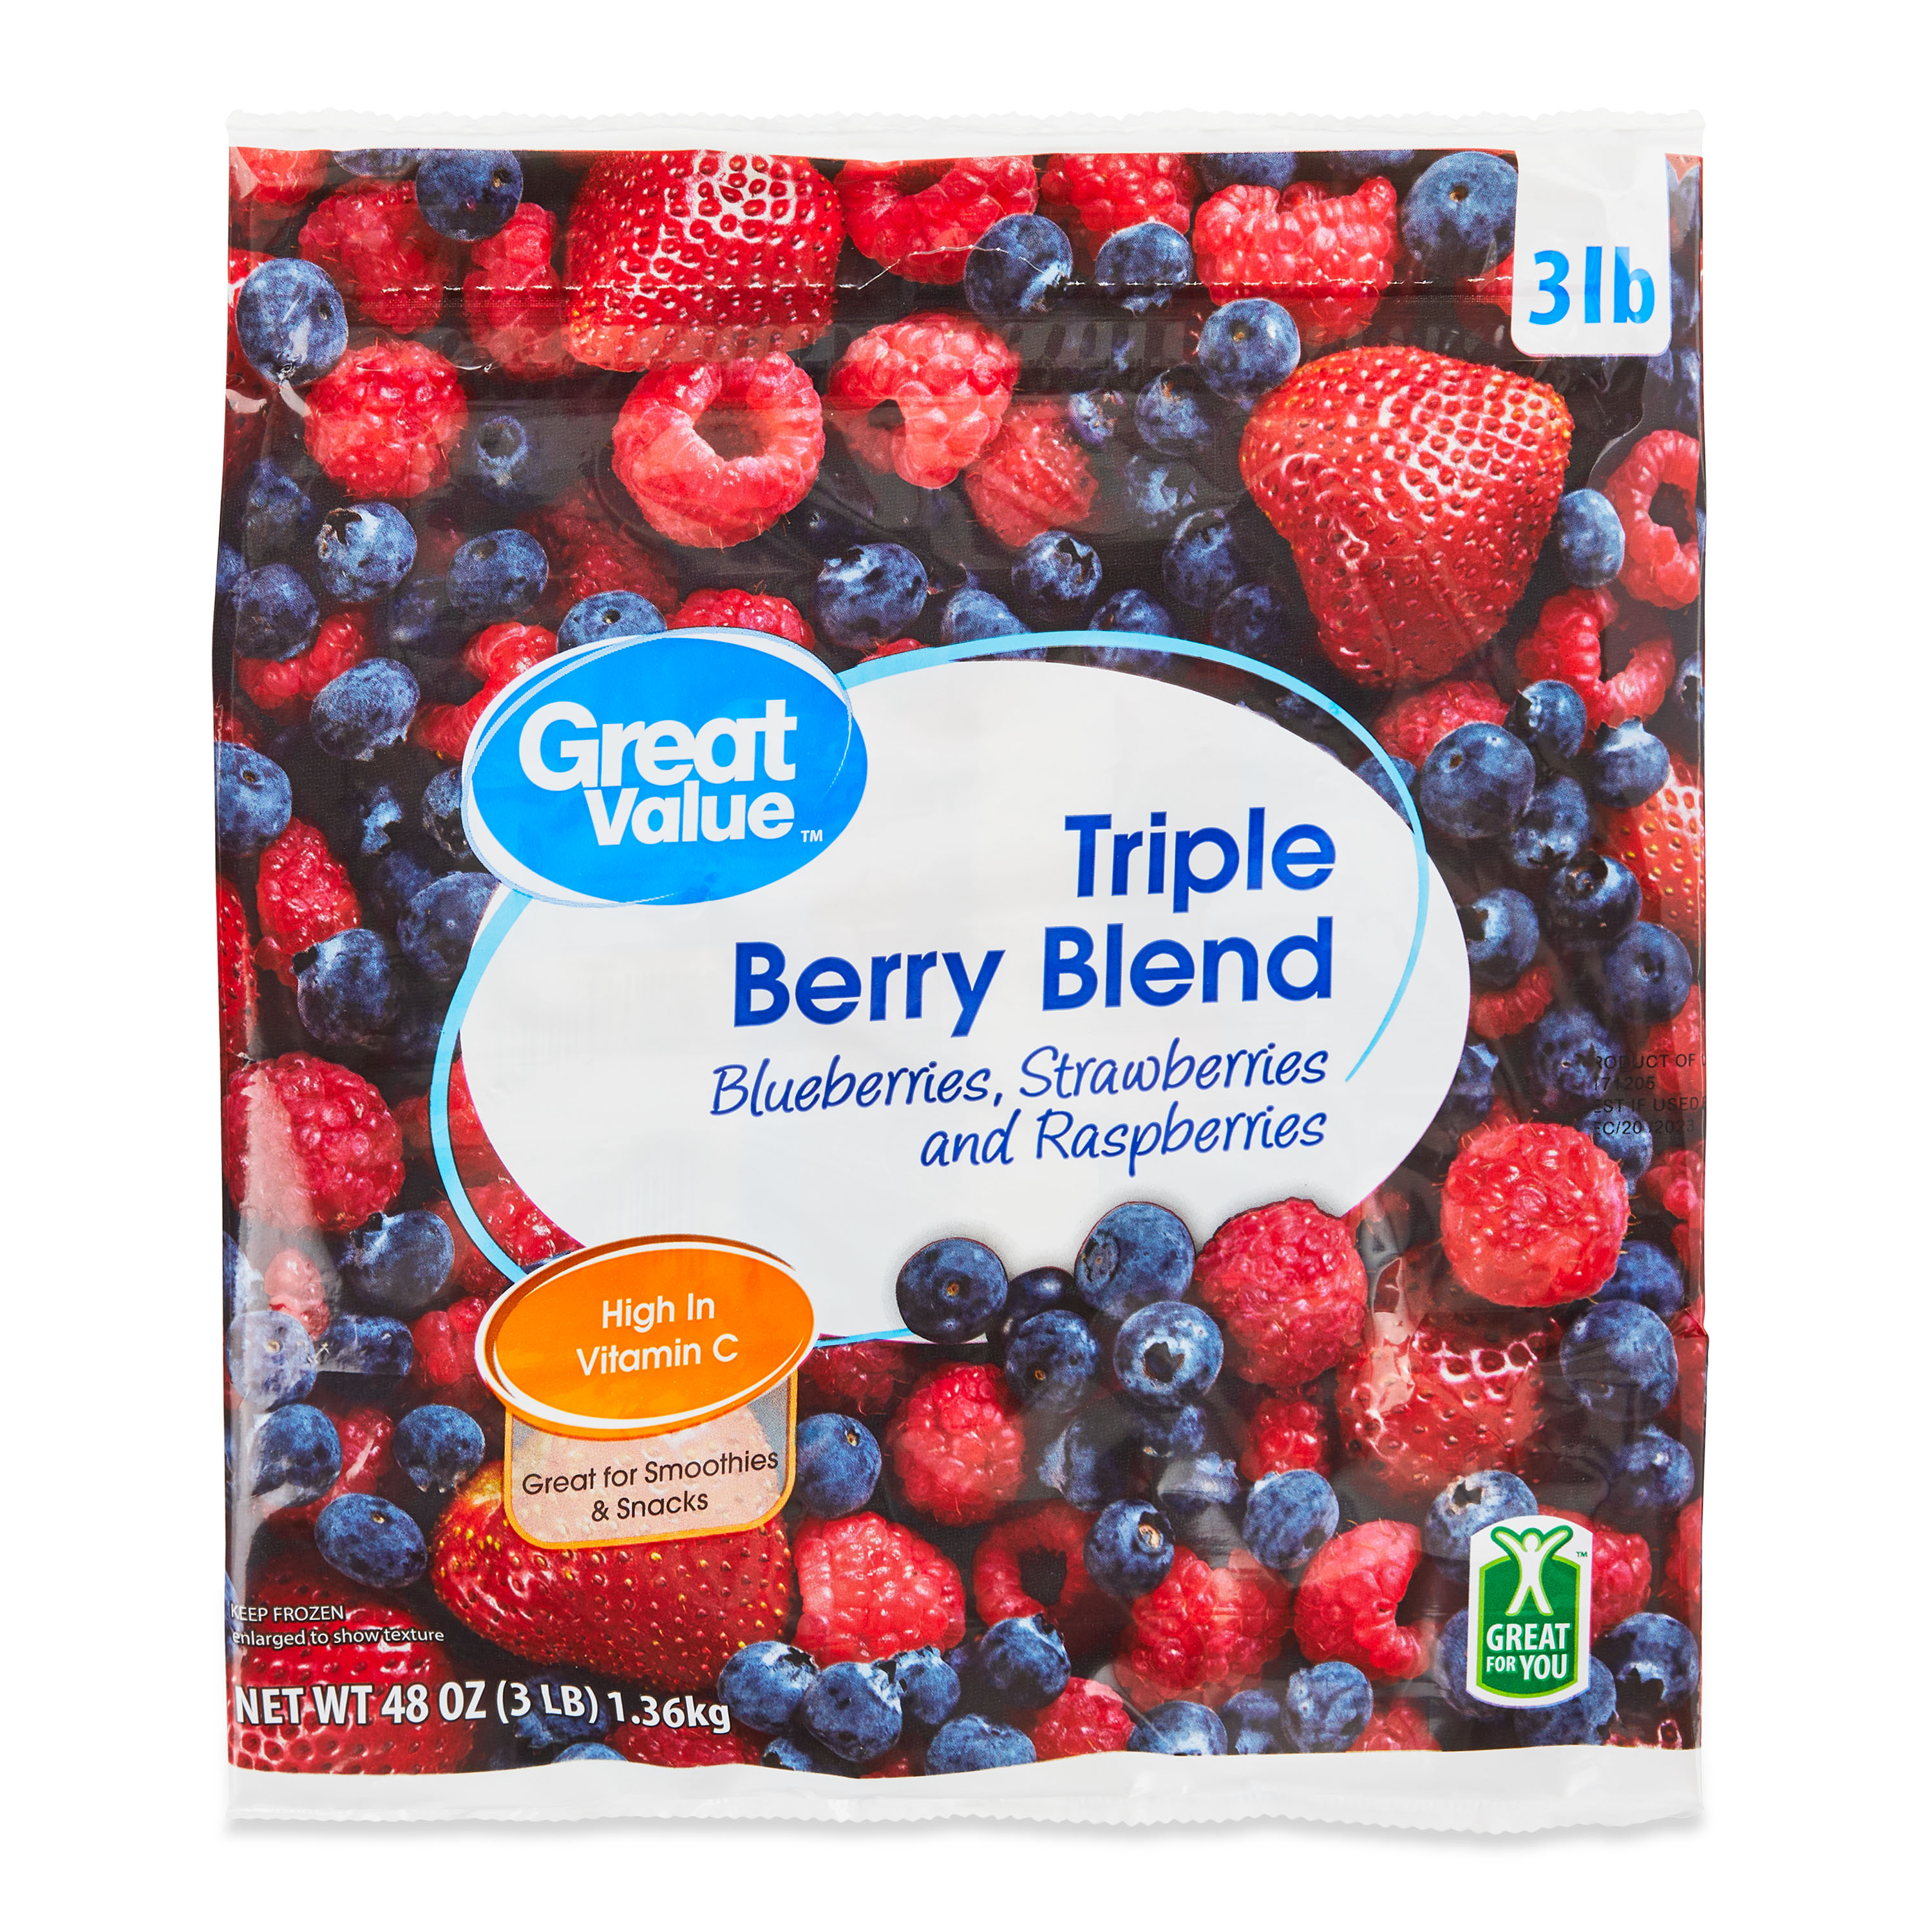 Frisky Fruit: Mix It Up with Blenders and Berries